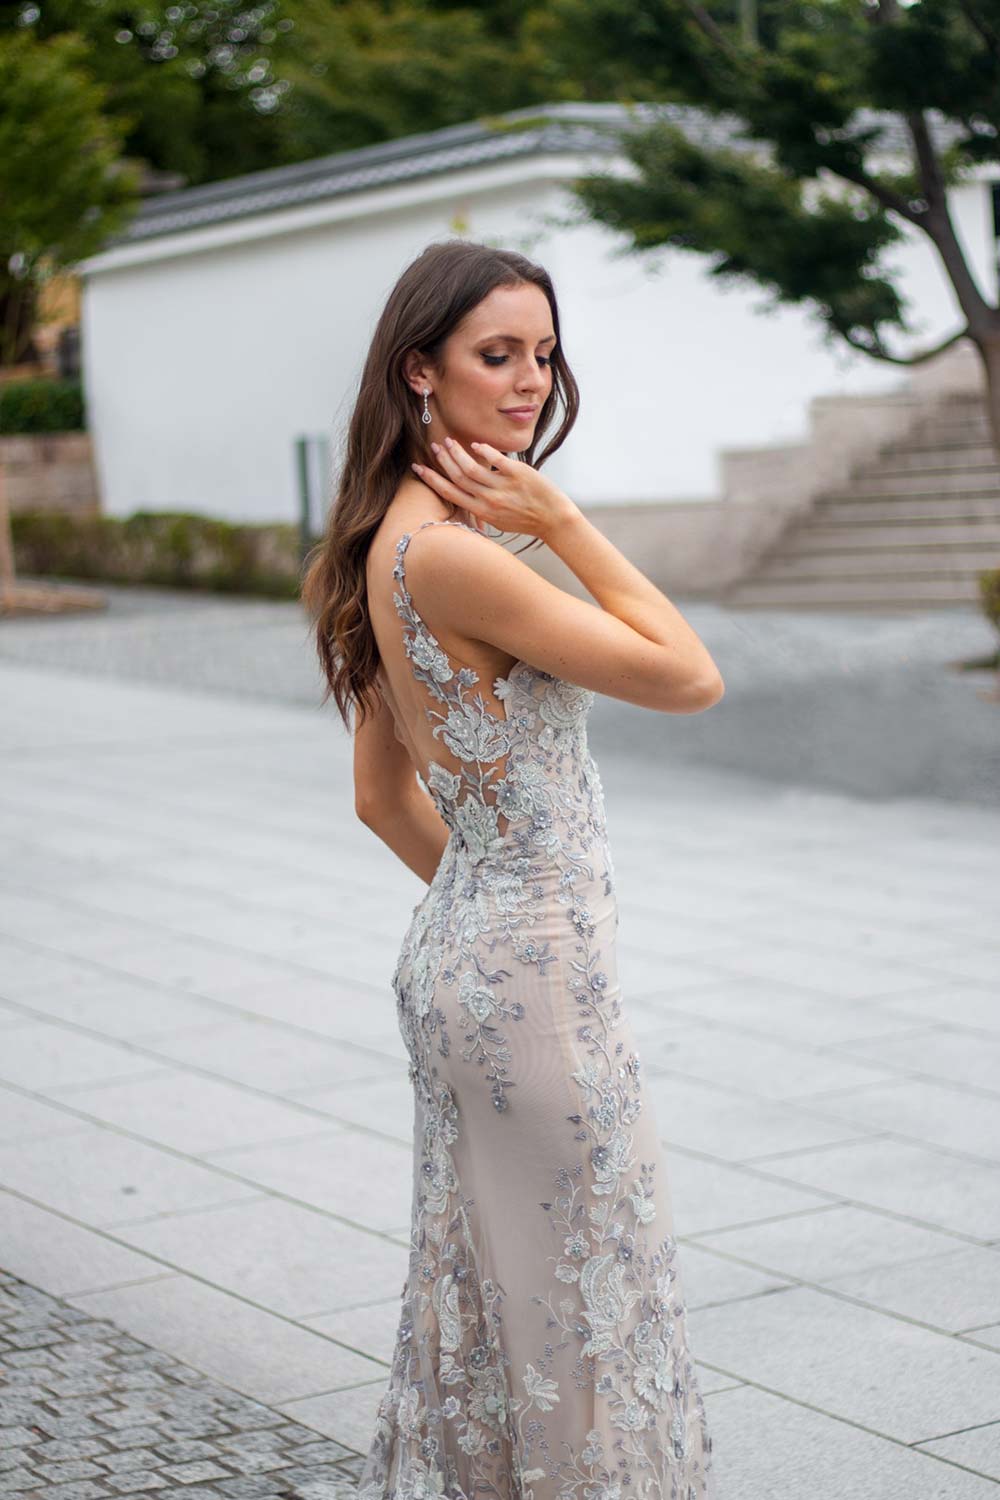 Female model wearing Vinka Design An Oriental Affair Wedding Dress. At a japanese temple in Kyoto the side detail of a slender silhouette form-fitting gown with a low sheer back, deep v-neckline and thin straps